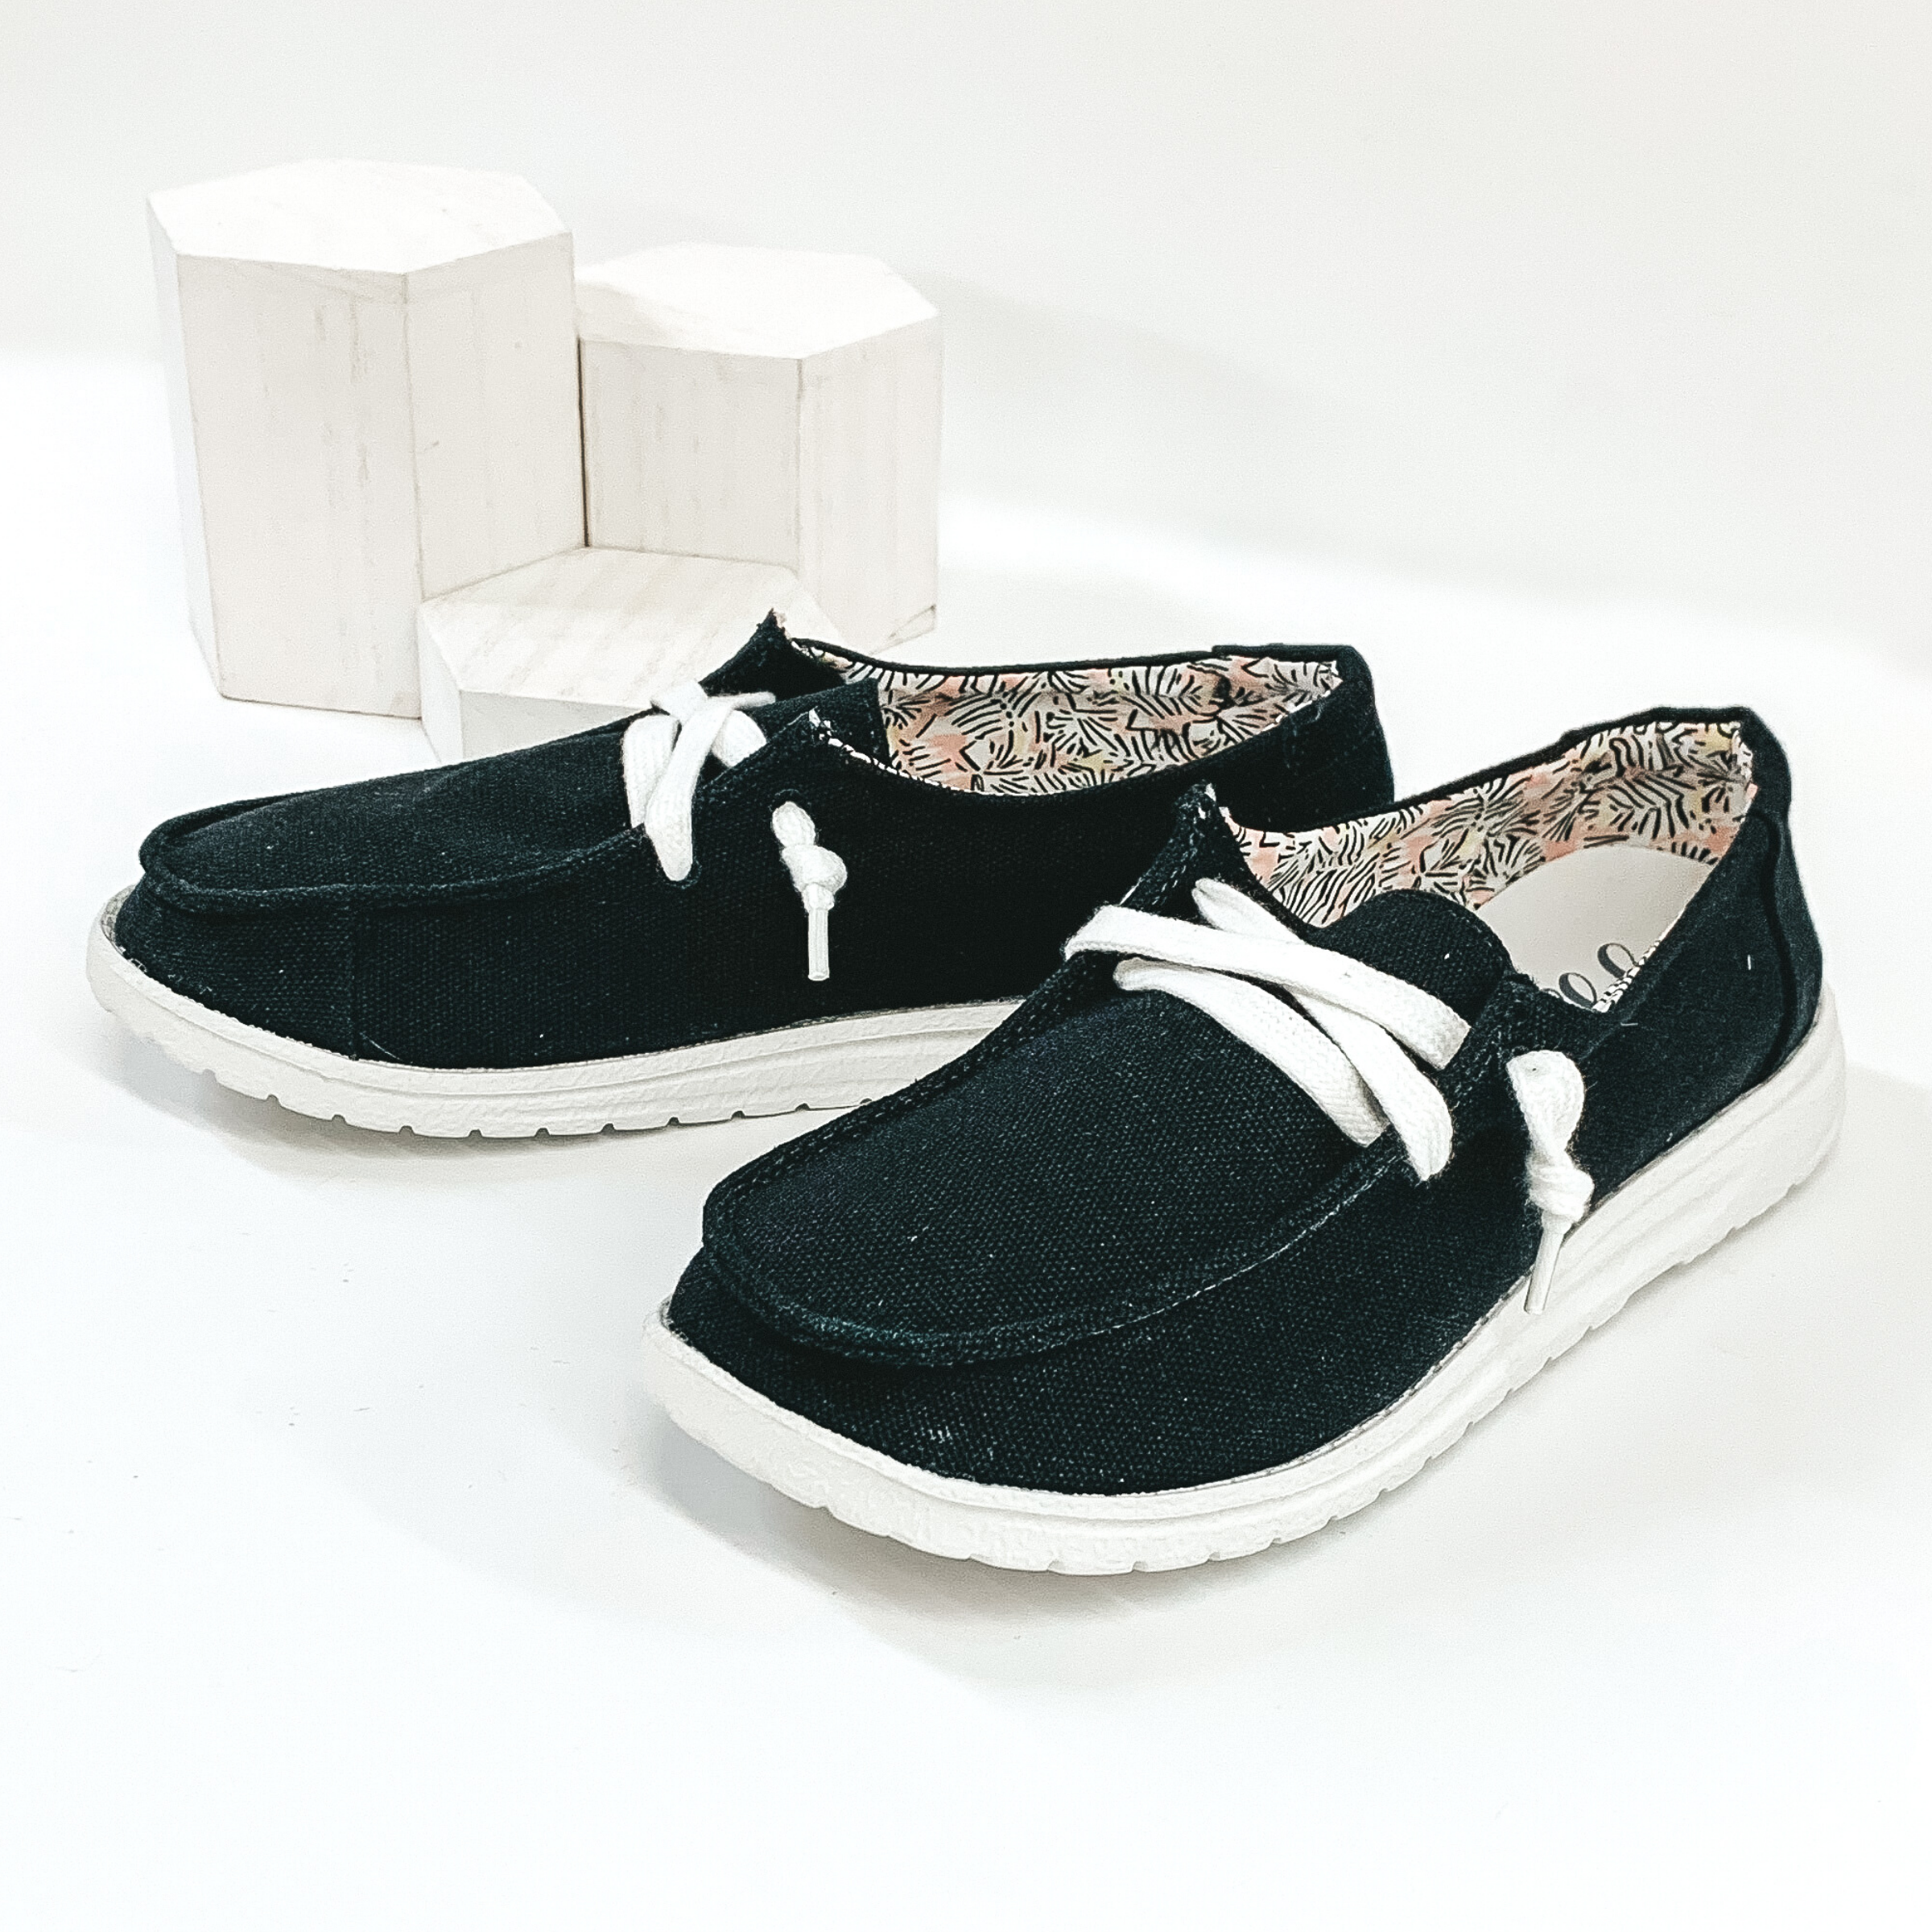 Black slip on canvas loafers with a white colored shoe lace and white sole. Pictured on white background.